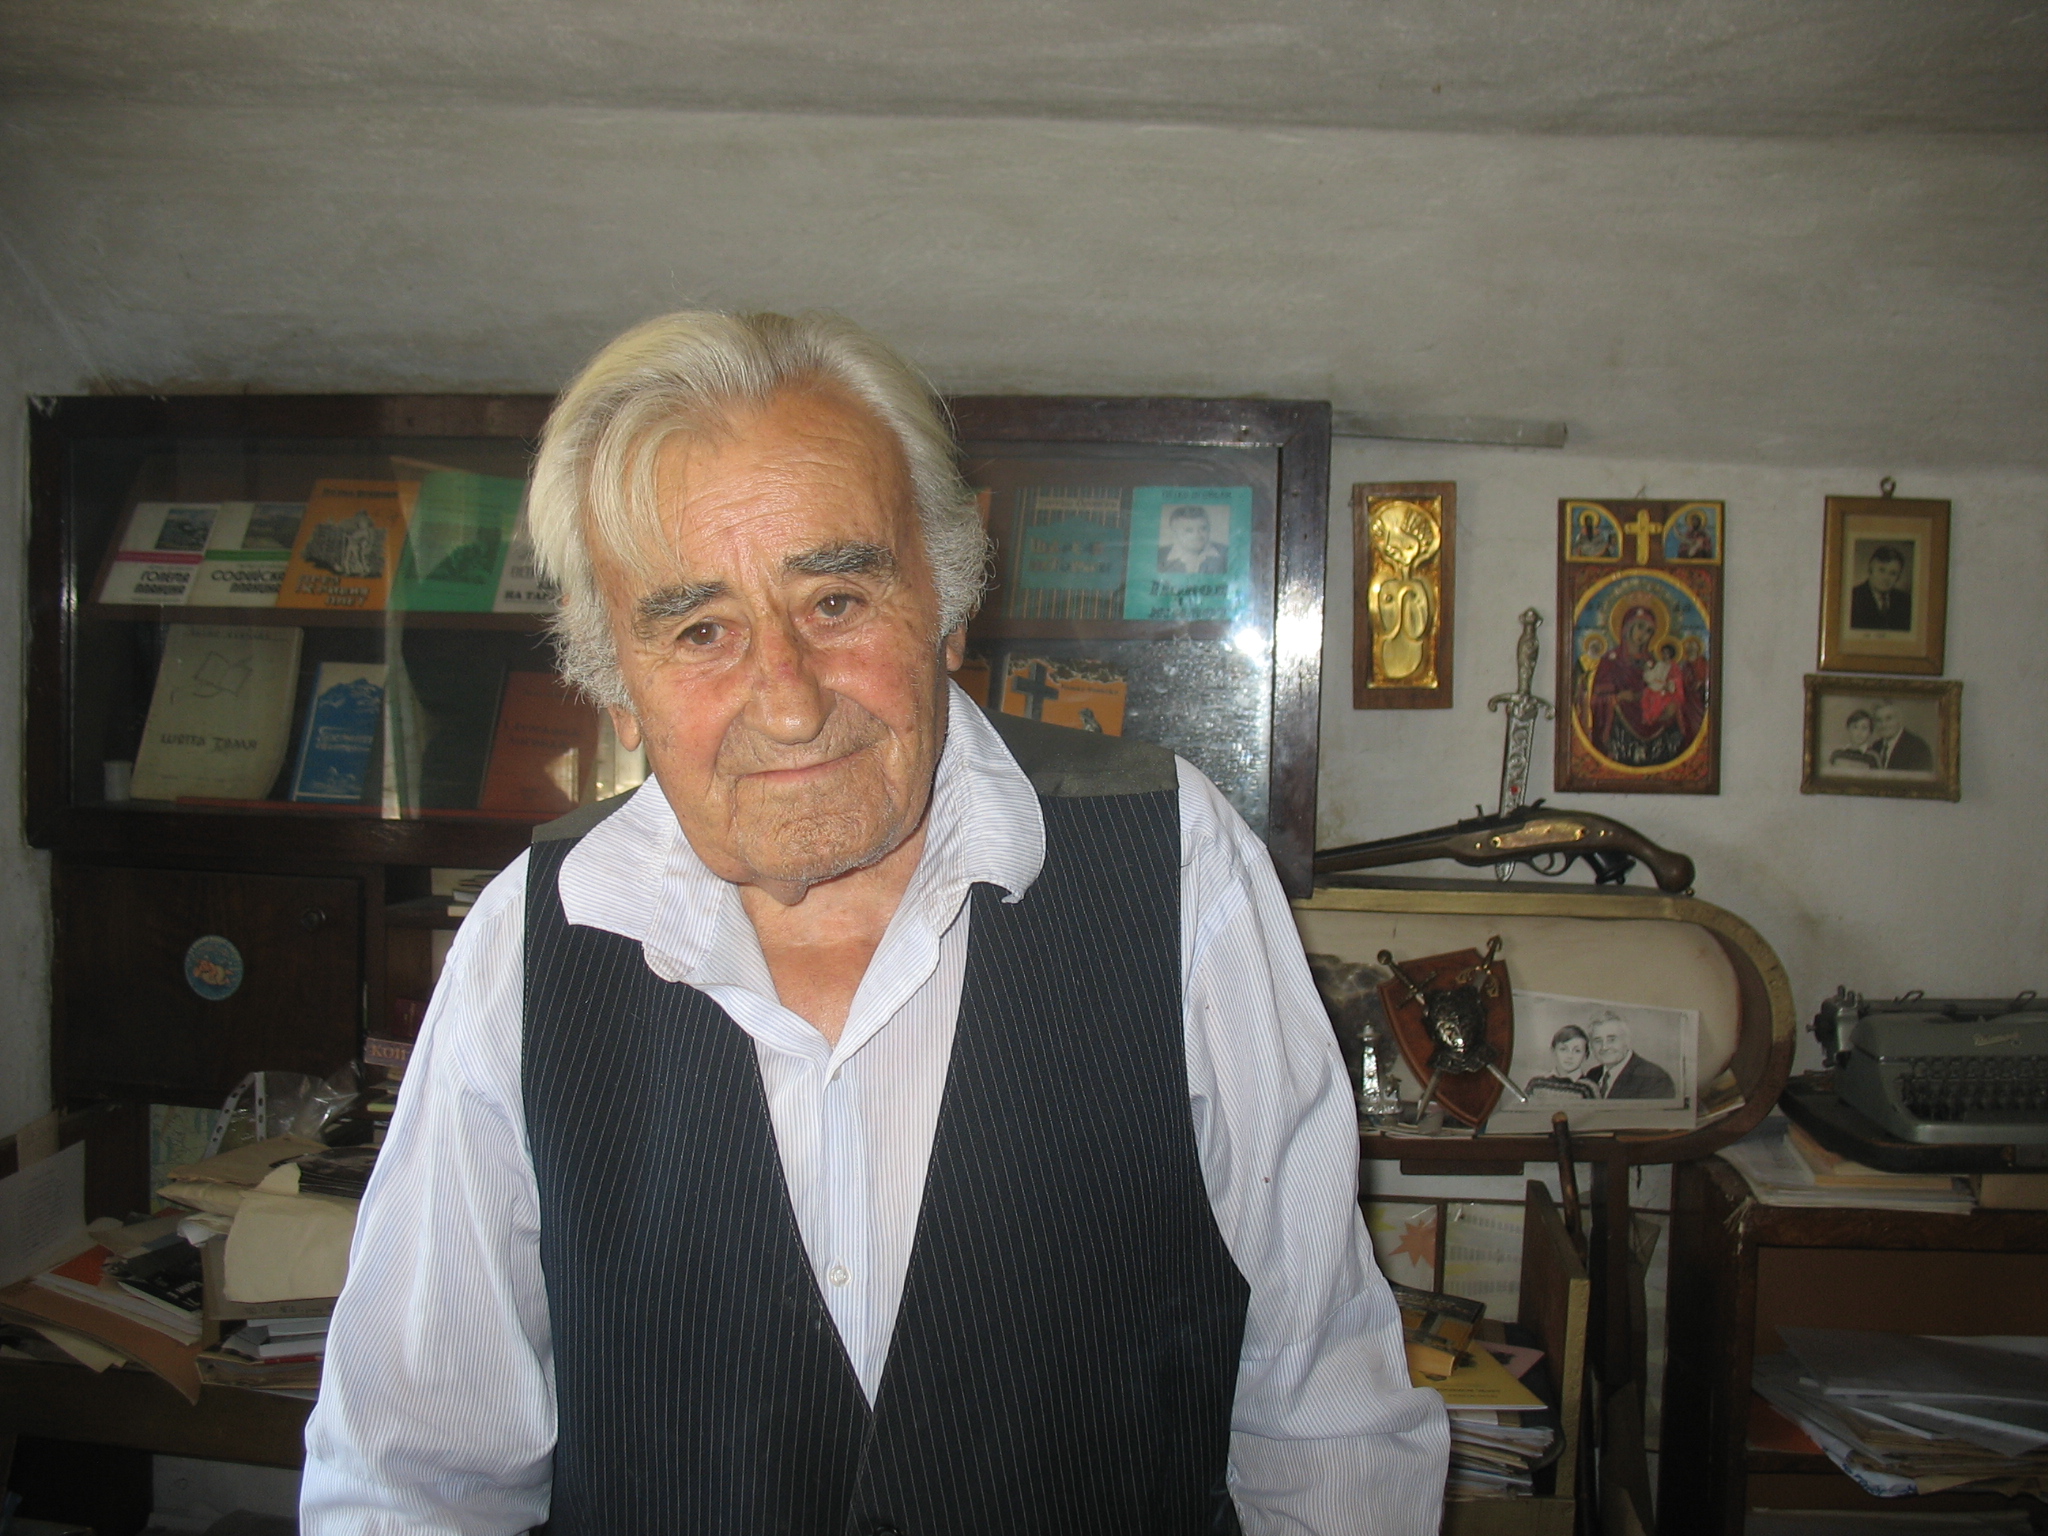 Petko Ogoyski in front of a part of his collection, 2016